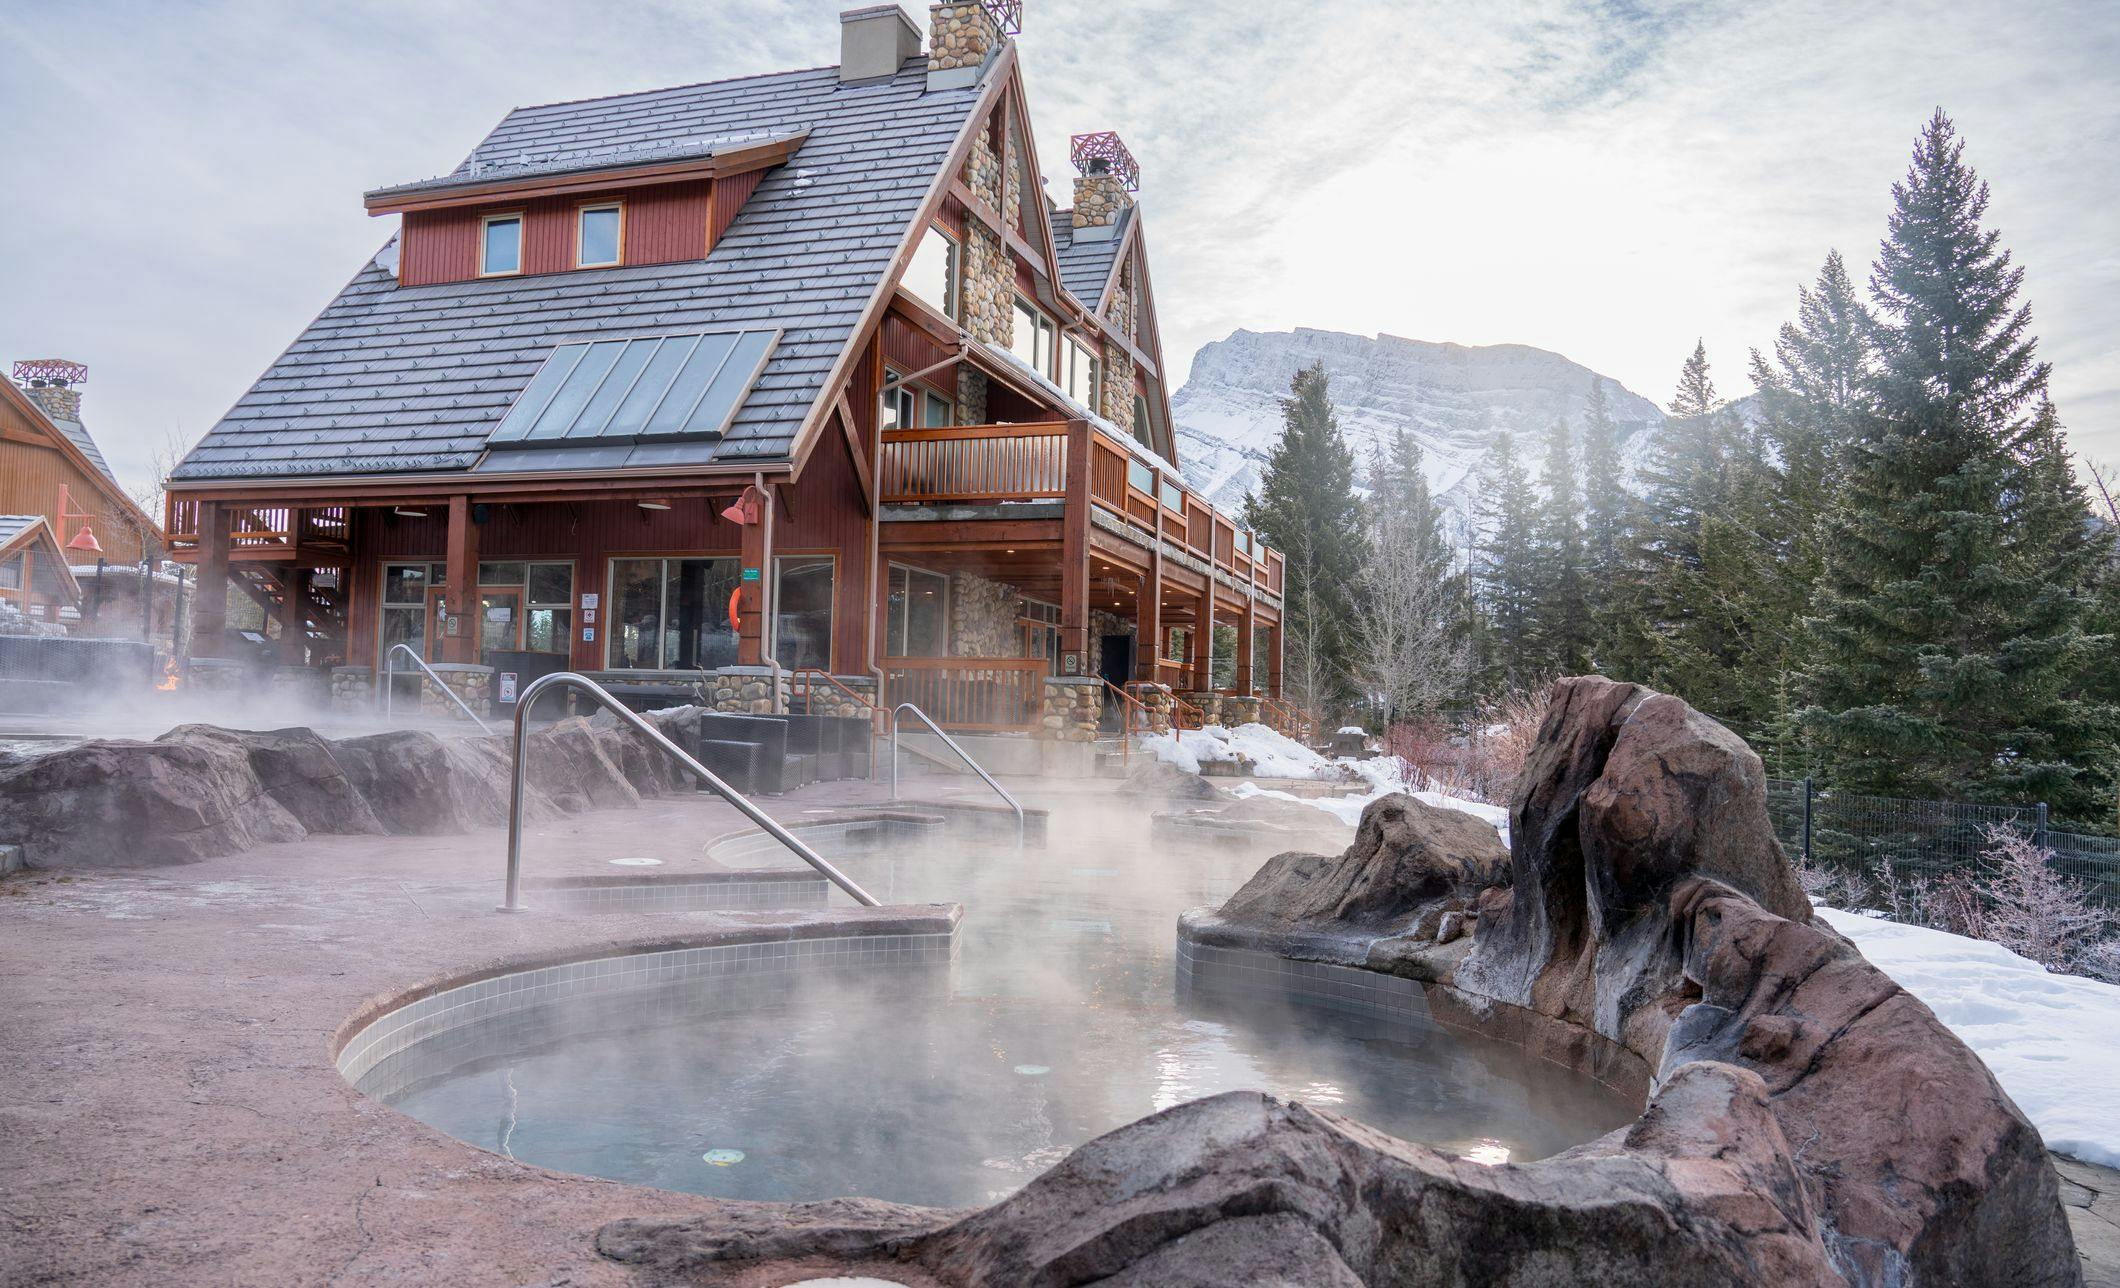 A lodge with an outdoor hot tub in front and snowy mountains surrounding